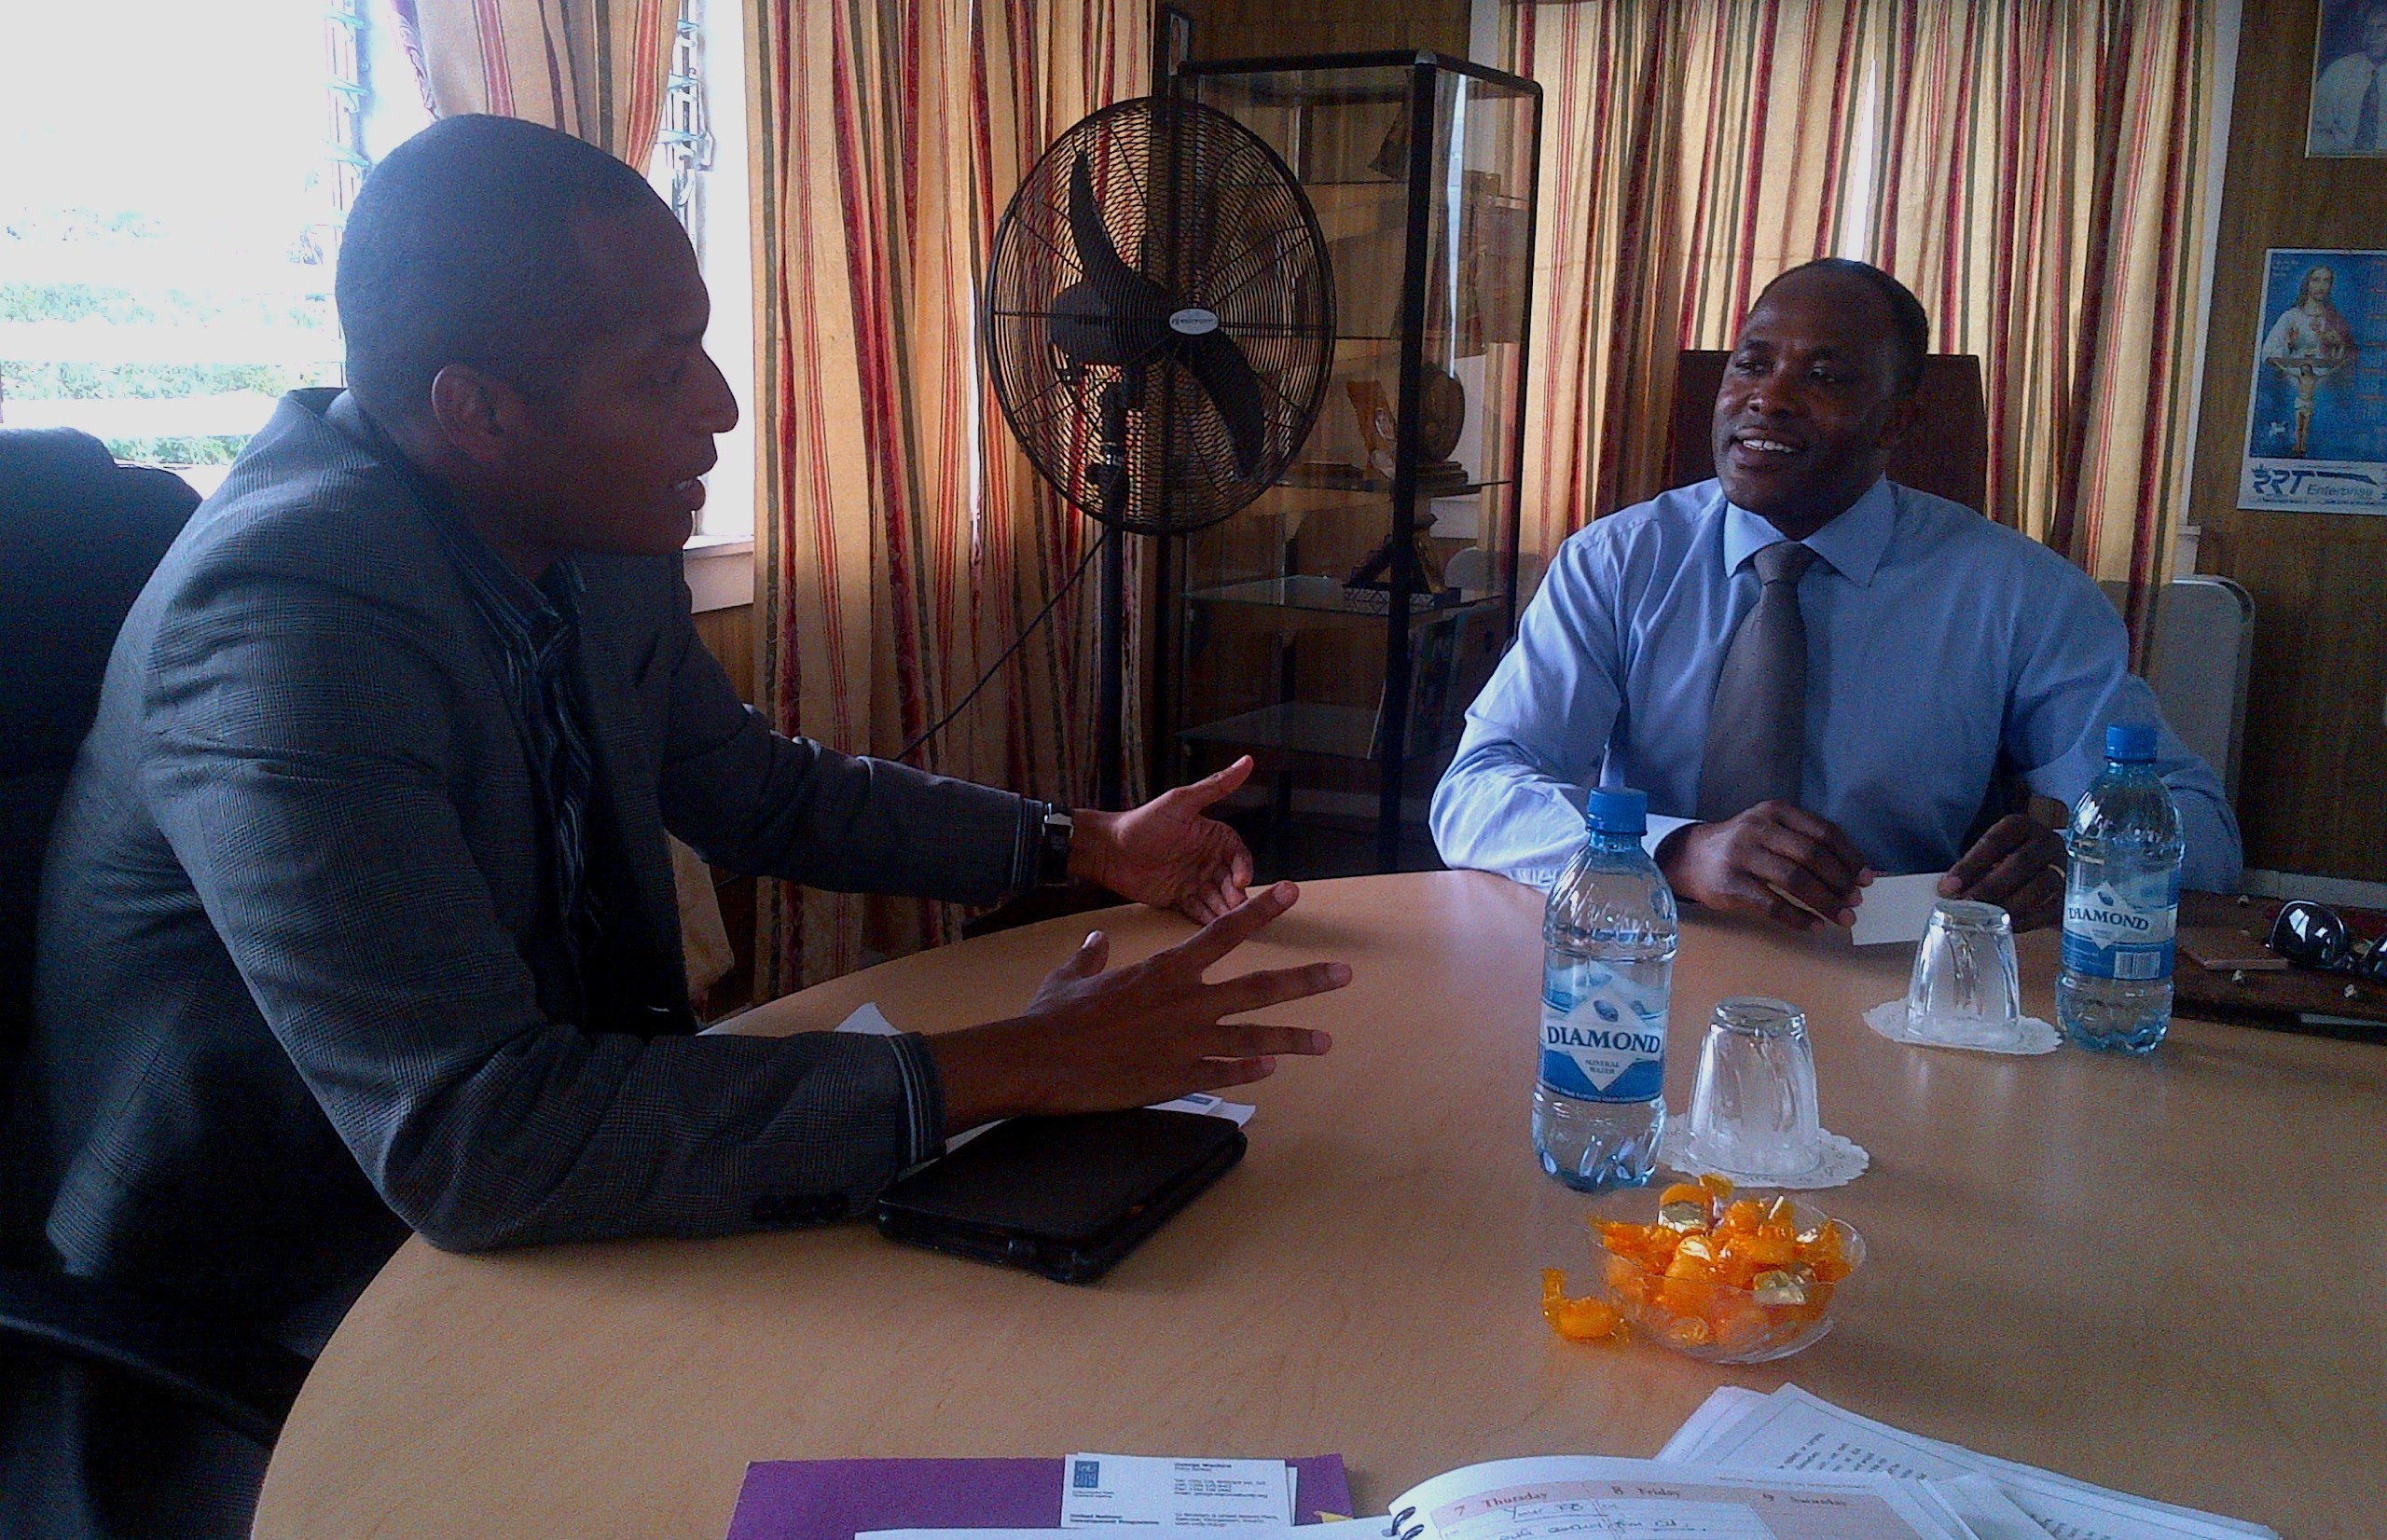 UNDP’s Policy Advisor, George Wachira meets with GCCI’s President, Clinton Urling at the Office of the Chamber on Friday, September 13, 2013.